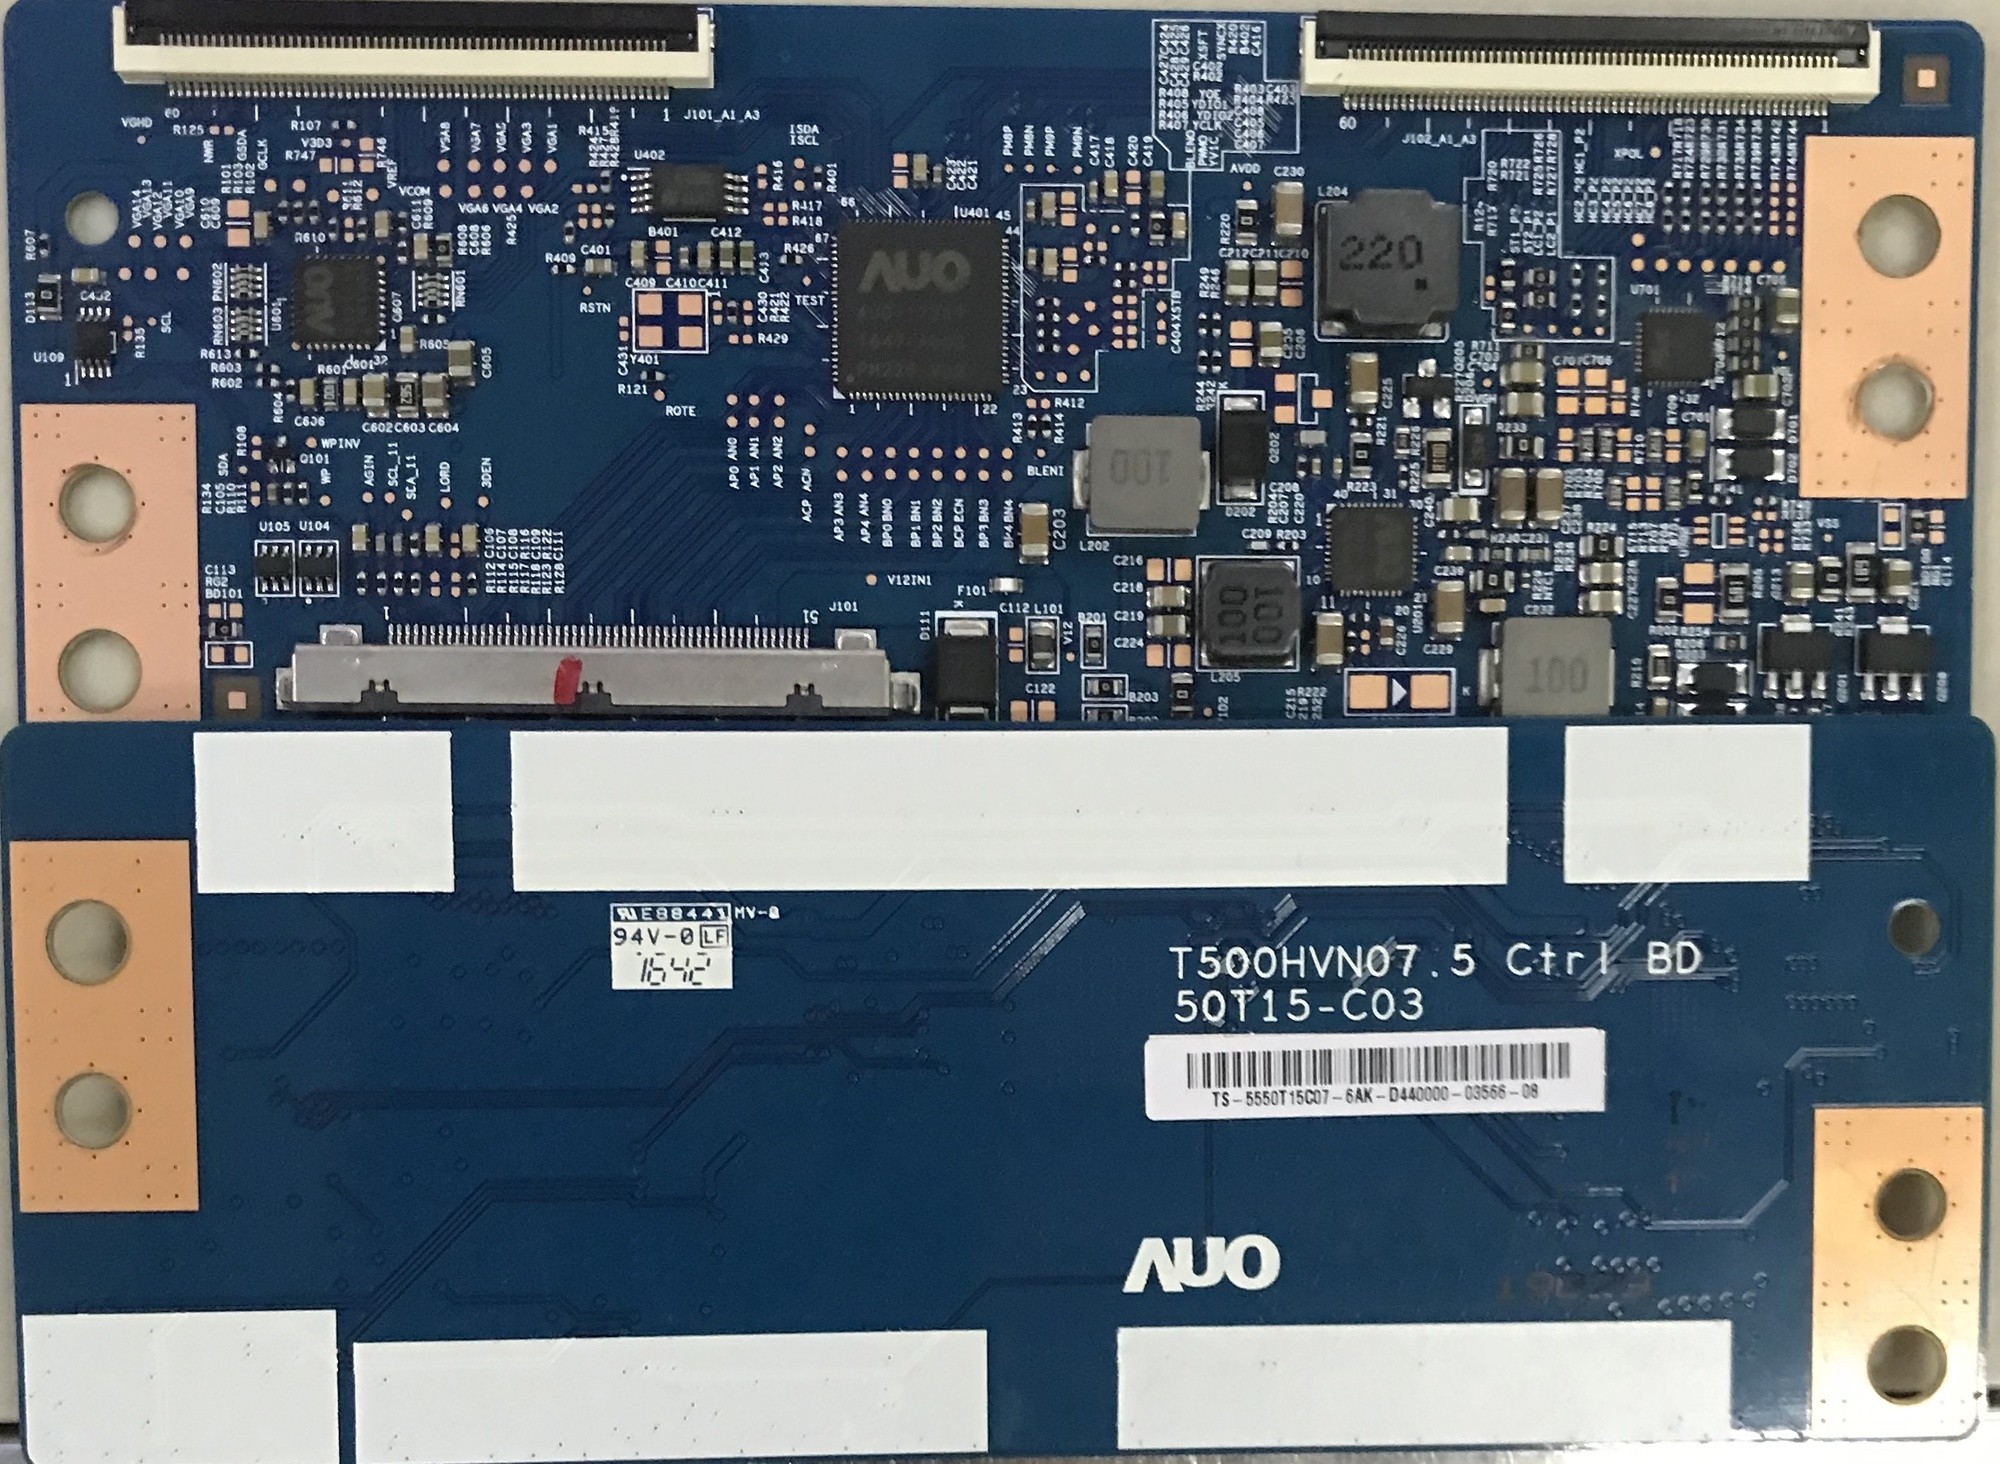 New and original YODA t500hvn07.5 Ctrl 50t15-c03 logic board Scaled and delivery